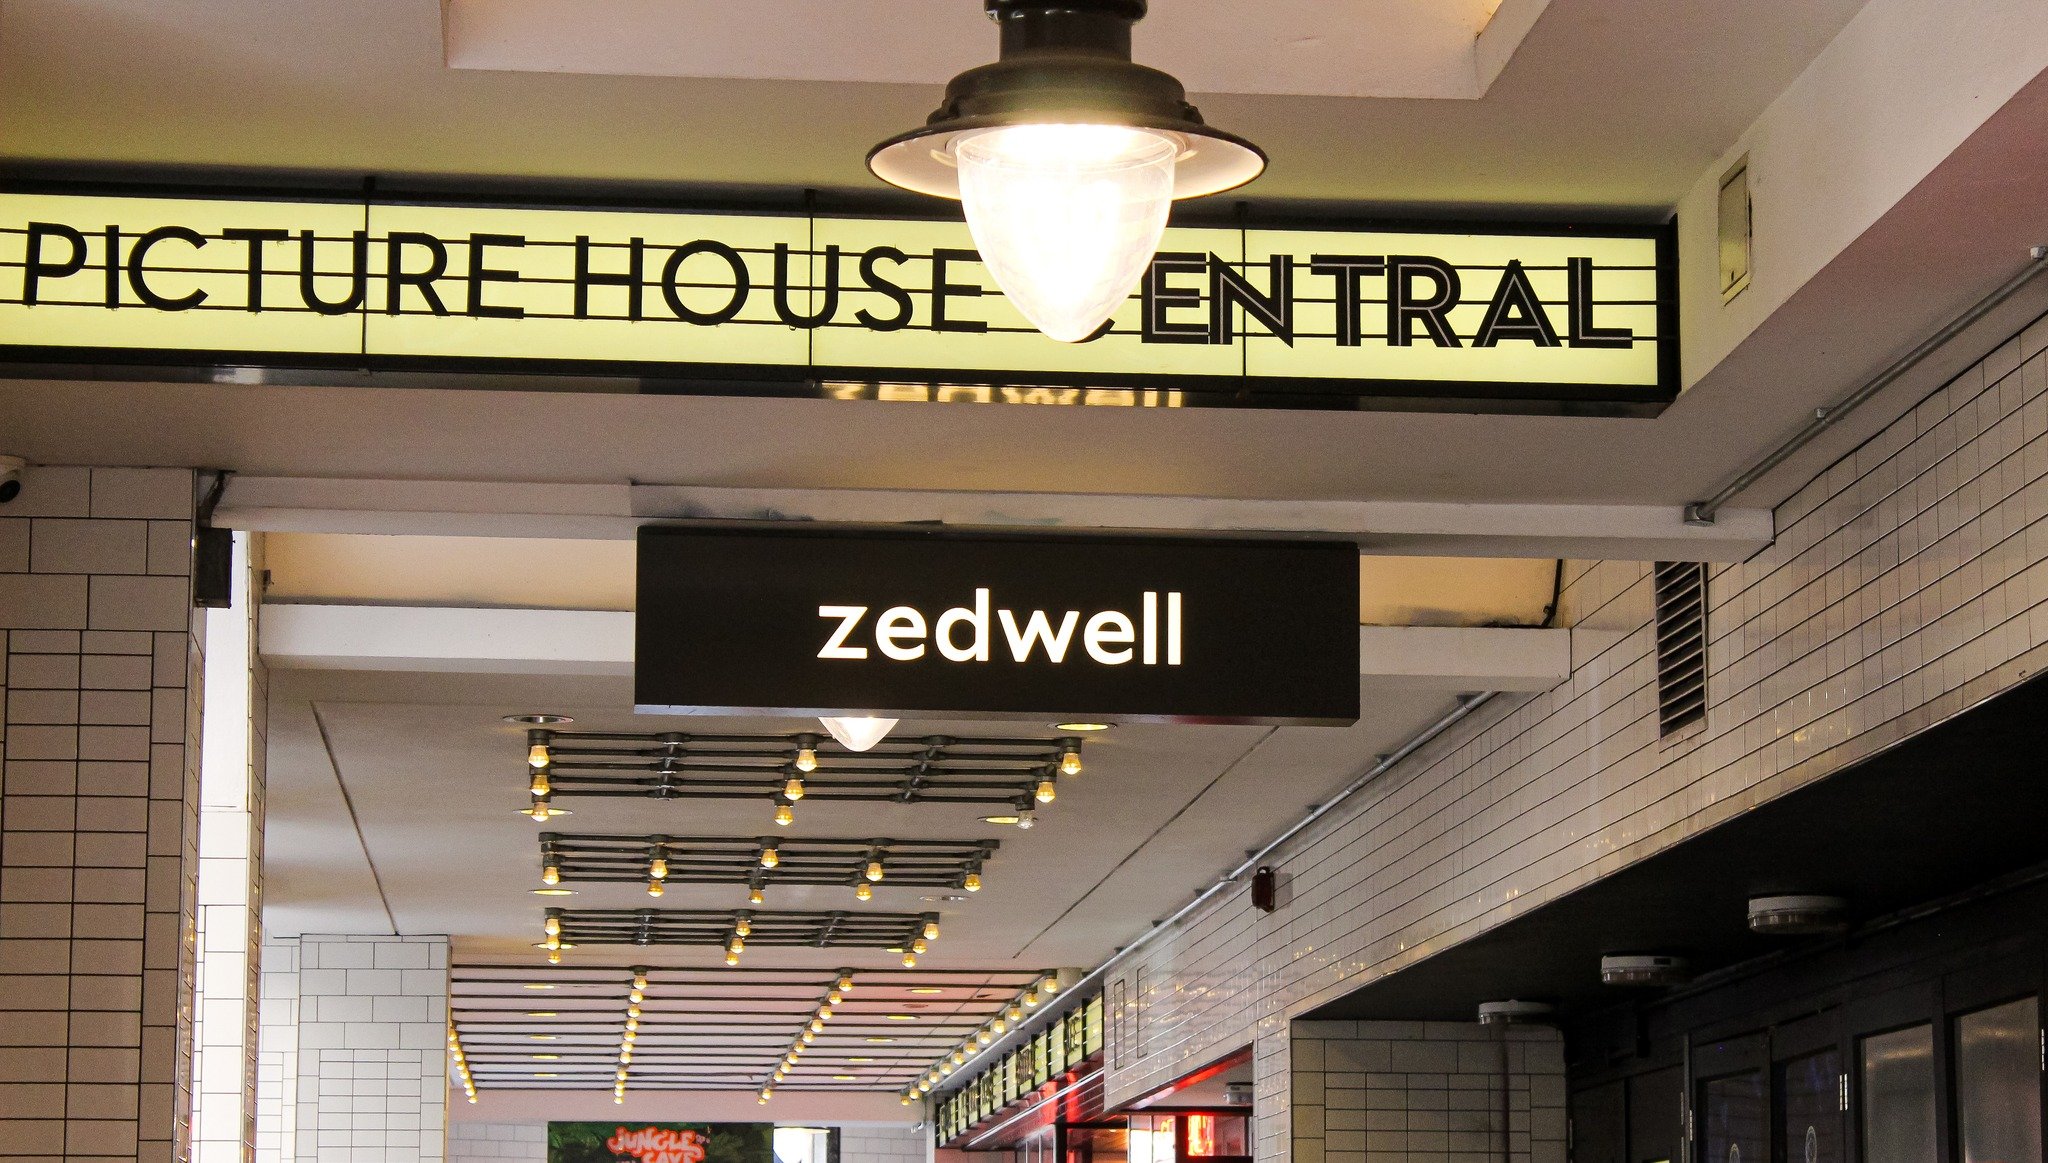 zedwell hotel piccadiily circus entrance.jpg